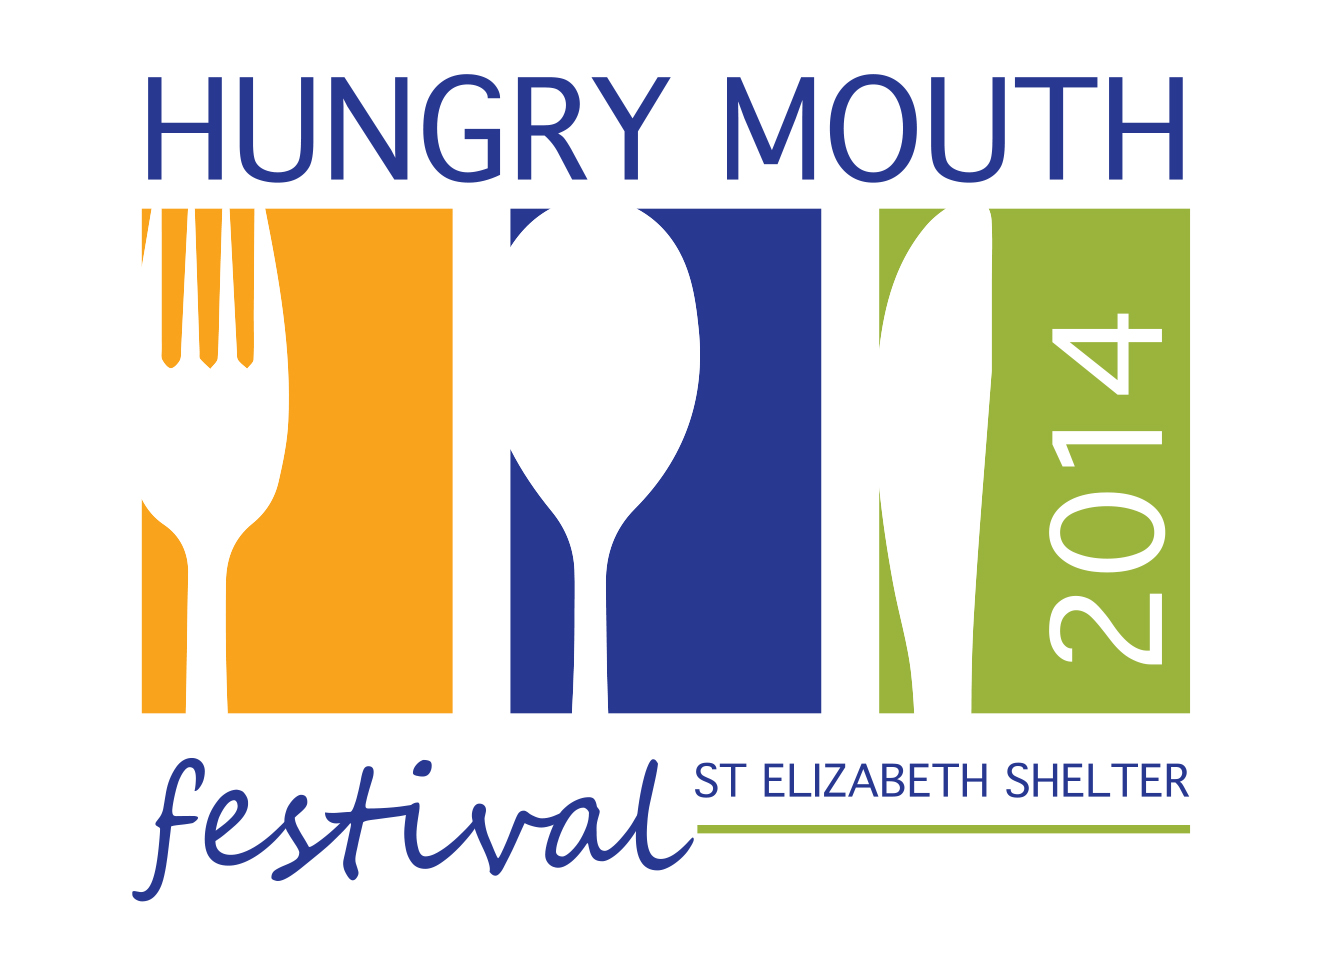 Hungry Mouth Festival – 2014